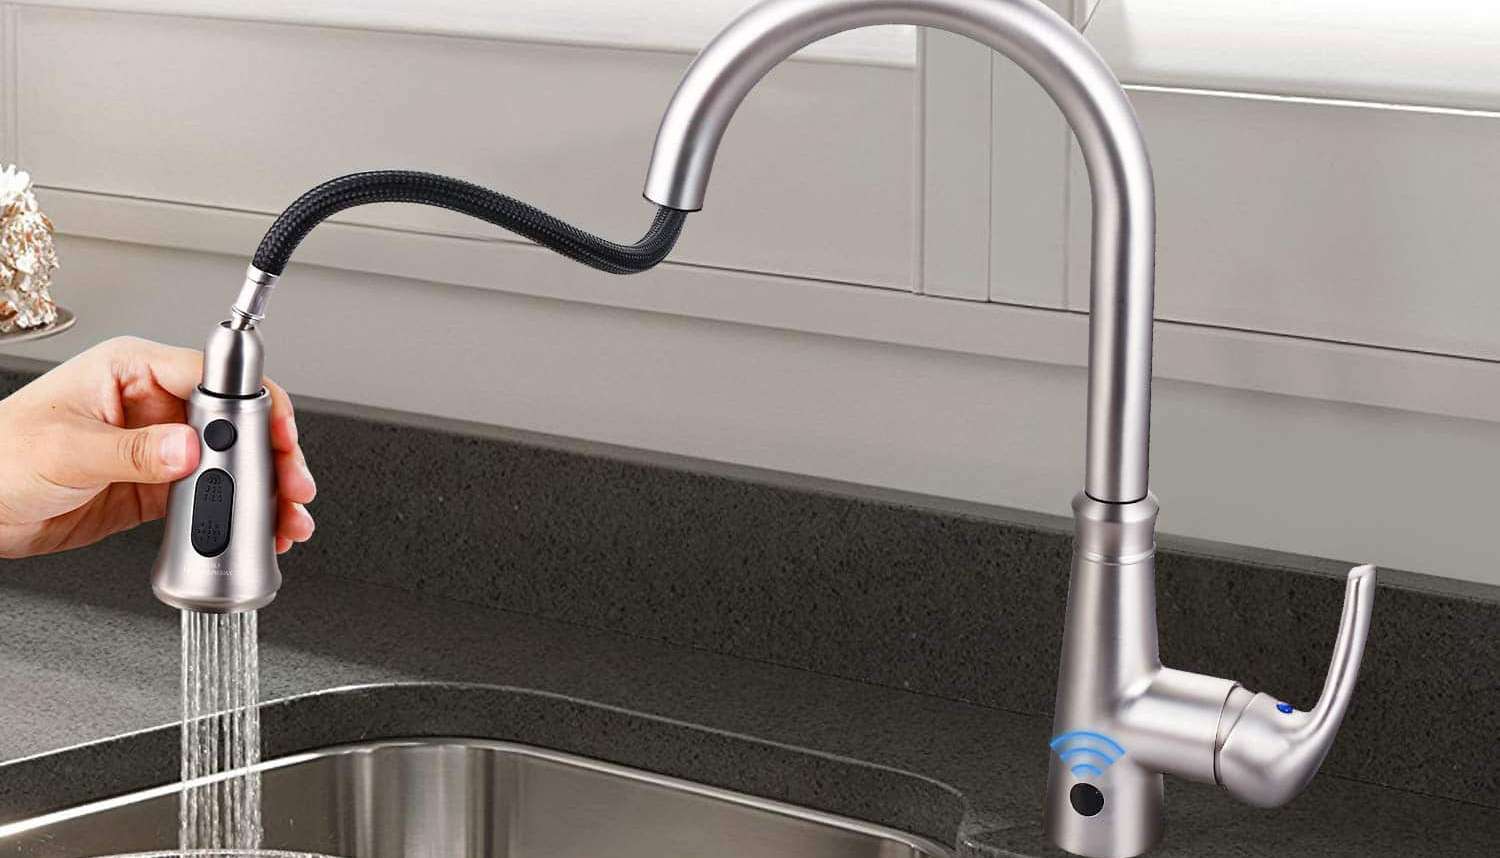 Top 10 Best Touch Kitchen Faucets in 2020 Reviews I Guide